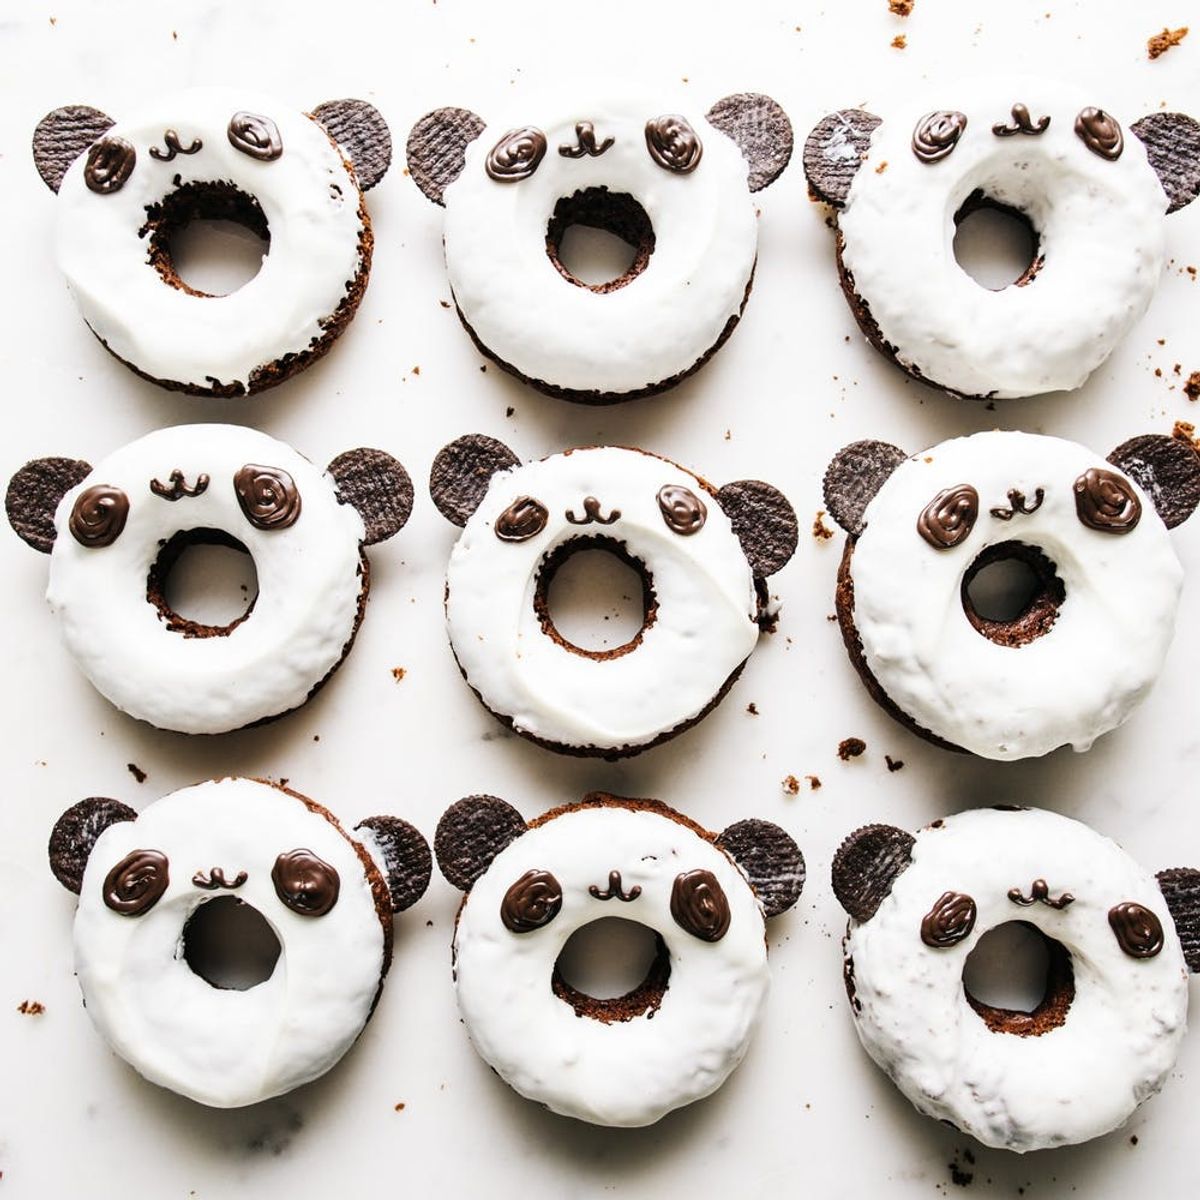 10 Super-Cute Donut Recipes for the Little Kid in Us All